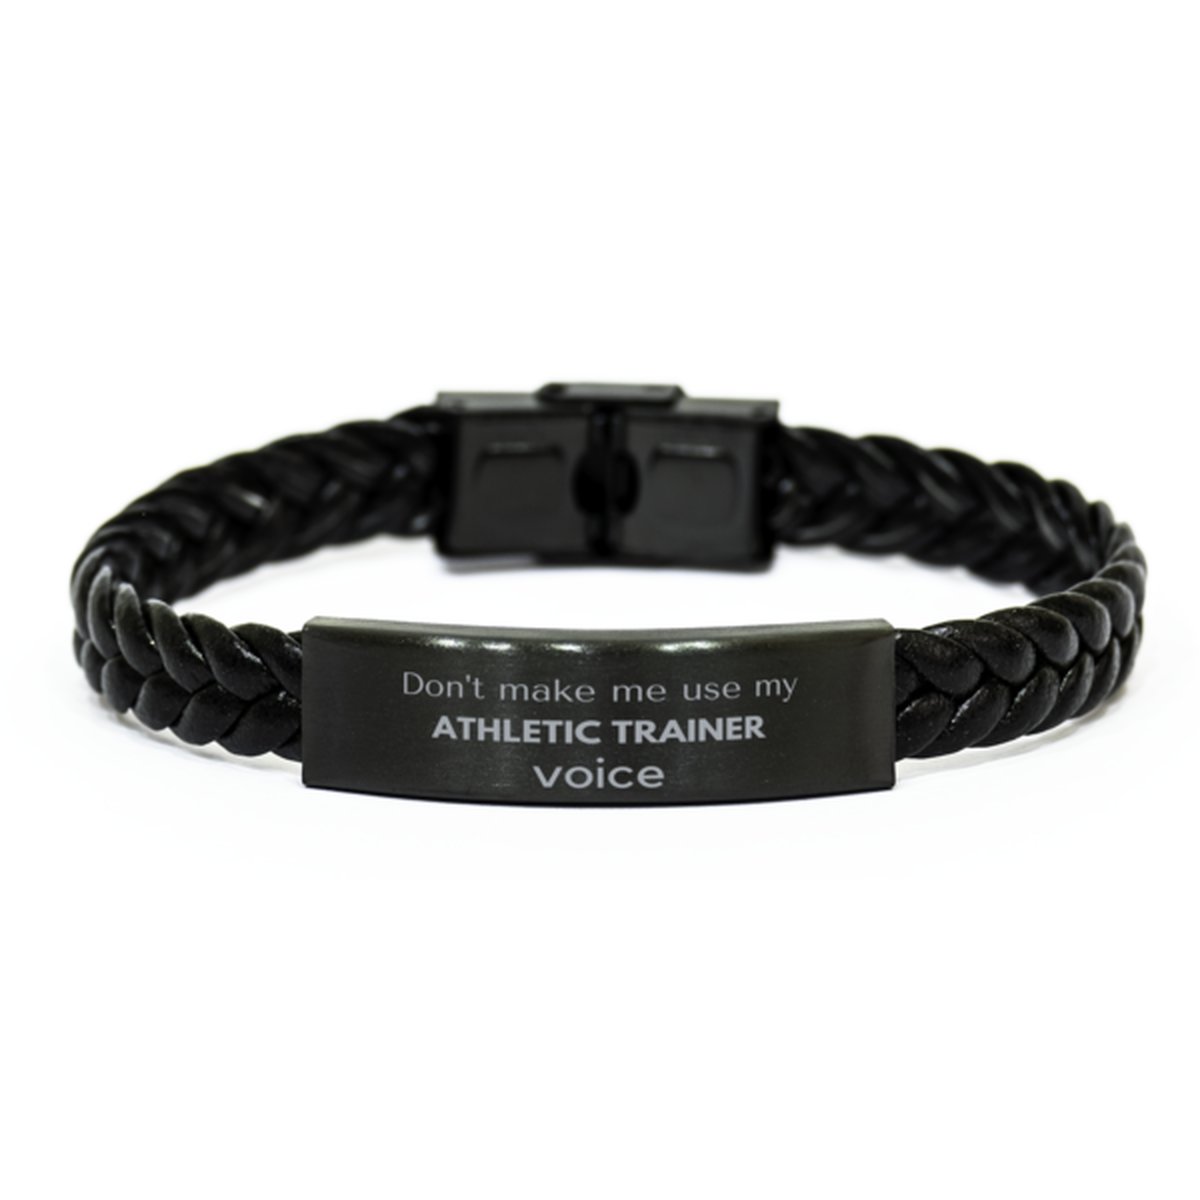 Don't make me use my Athletic Trainer voice, Sarcasm Athletic Trainer Gifts, Christmas Athletic Trainer Braided Leather Bracelet Birthday Unique Gifts For Athletic Trainer Coworkers, Men, Women, Colleague, Friends